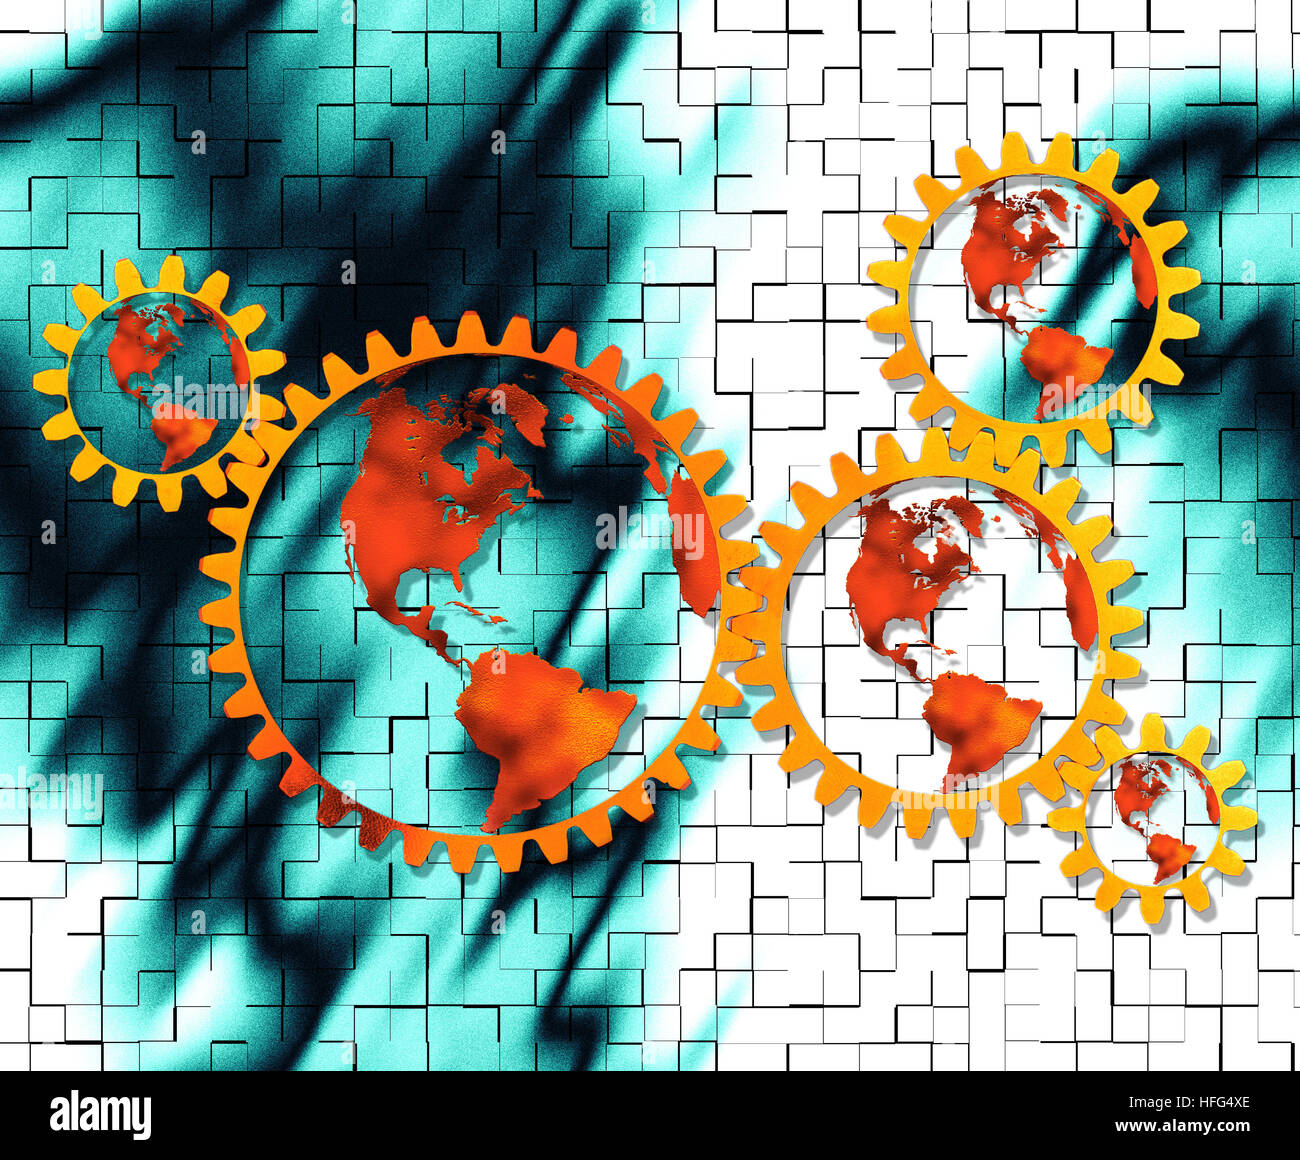 Symbolic Image of the 5 Continents with Gears Stock Photo